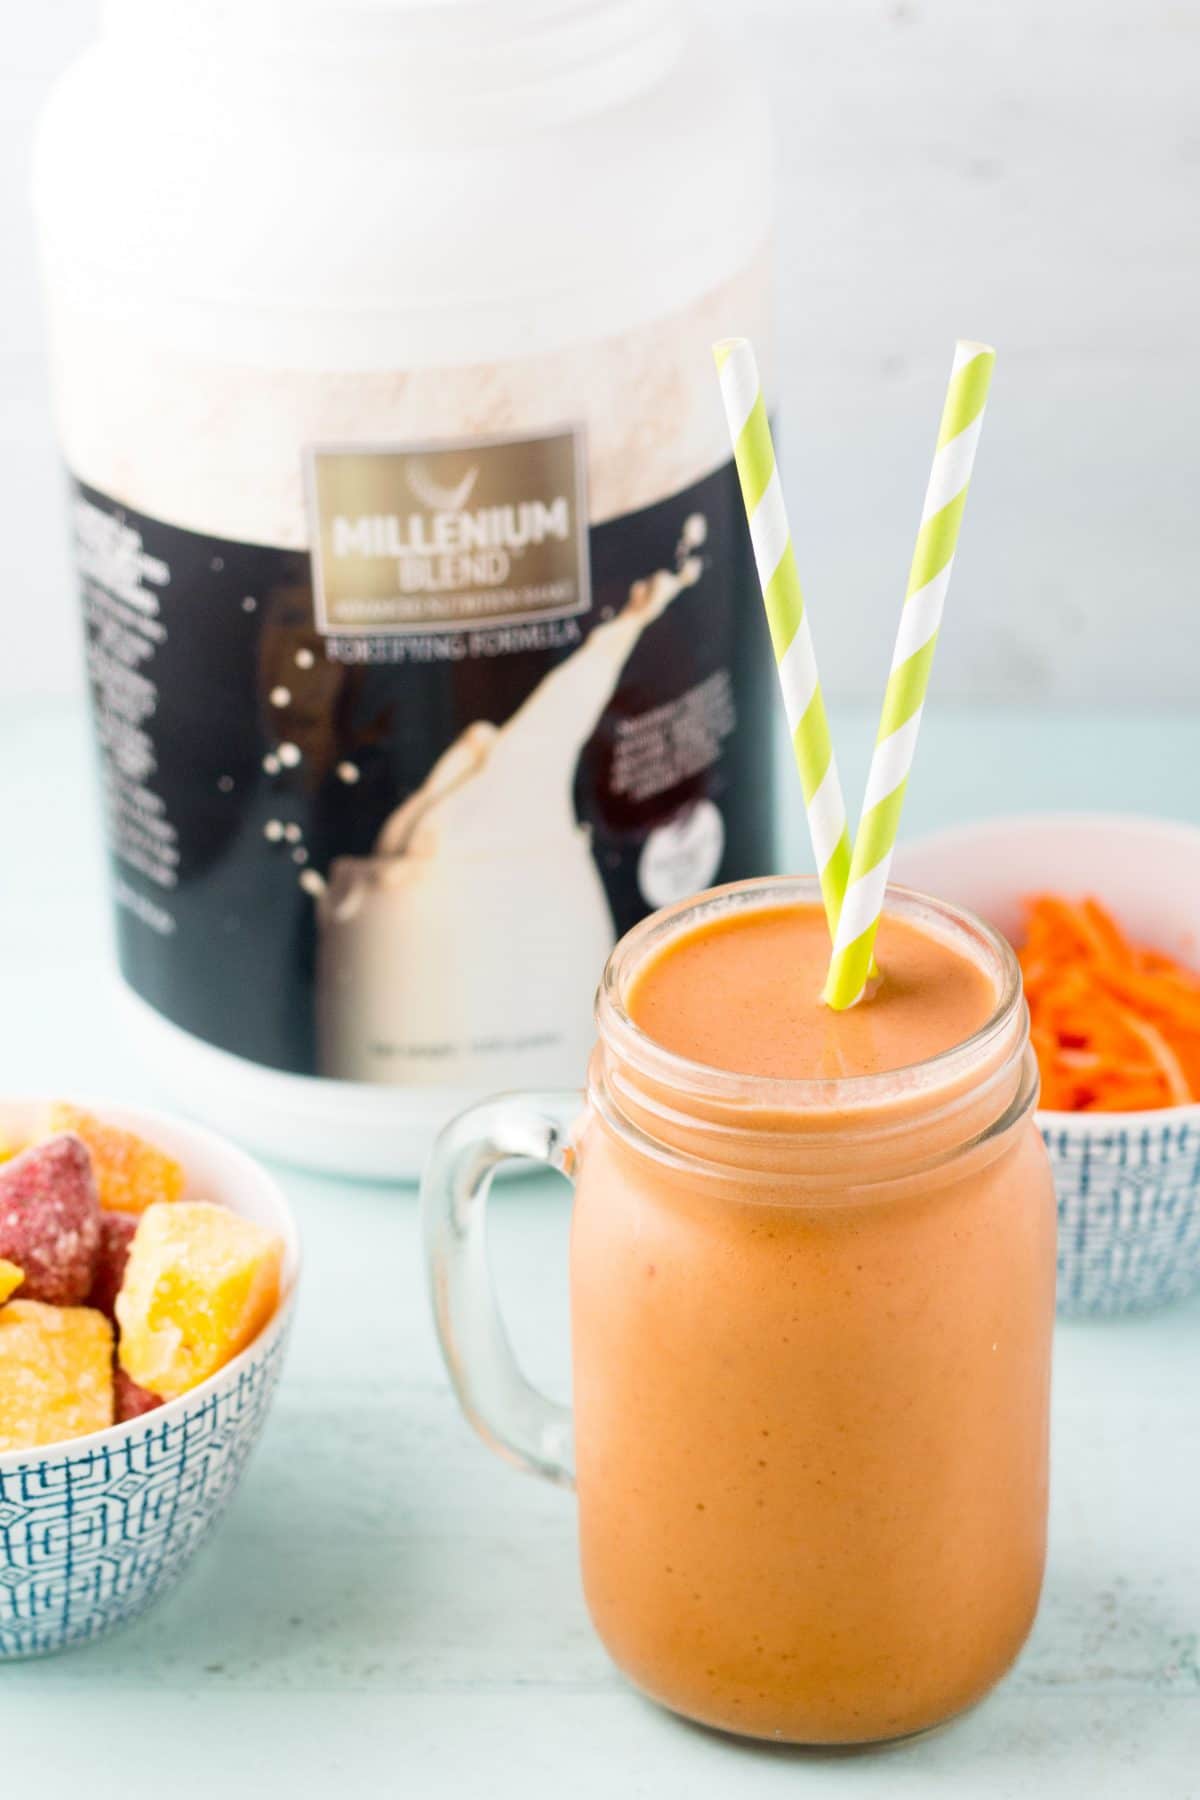 https://hungryhobby.net/wp-content/uploads/2013/07/tropical-carrot-protein-smoothie-2.jpg